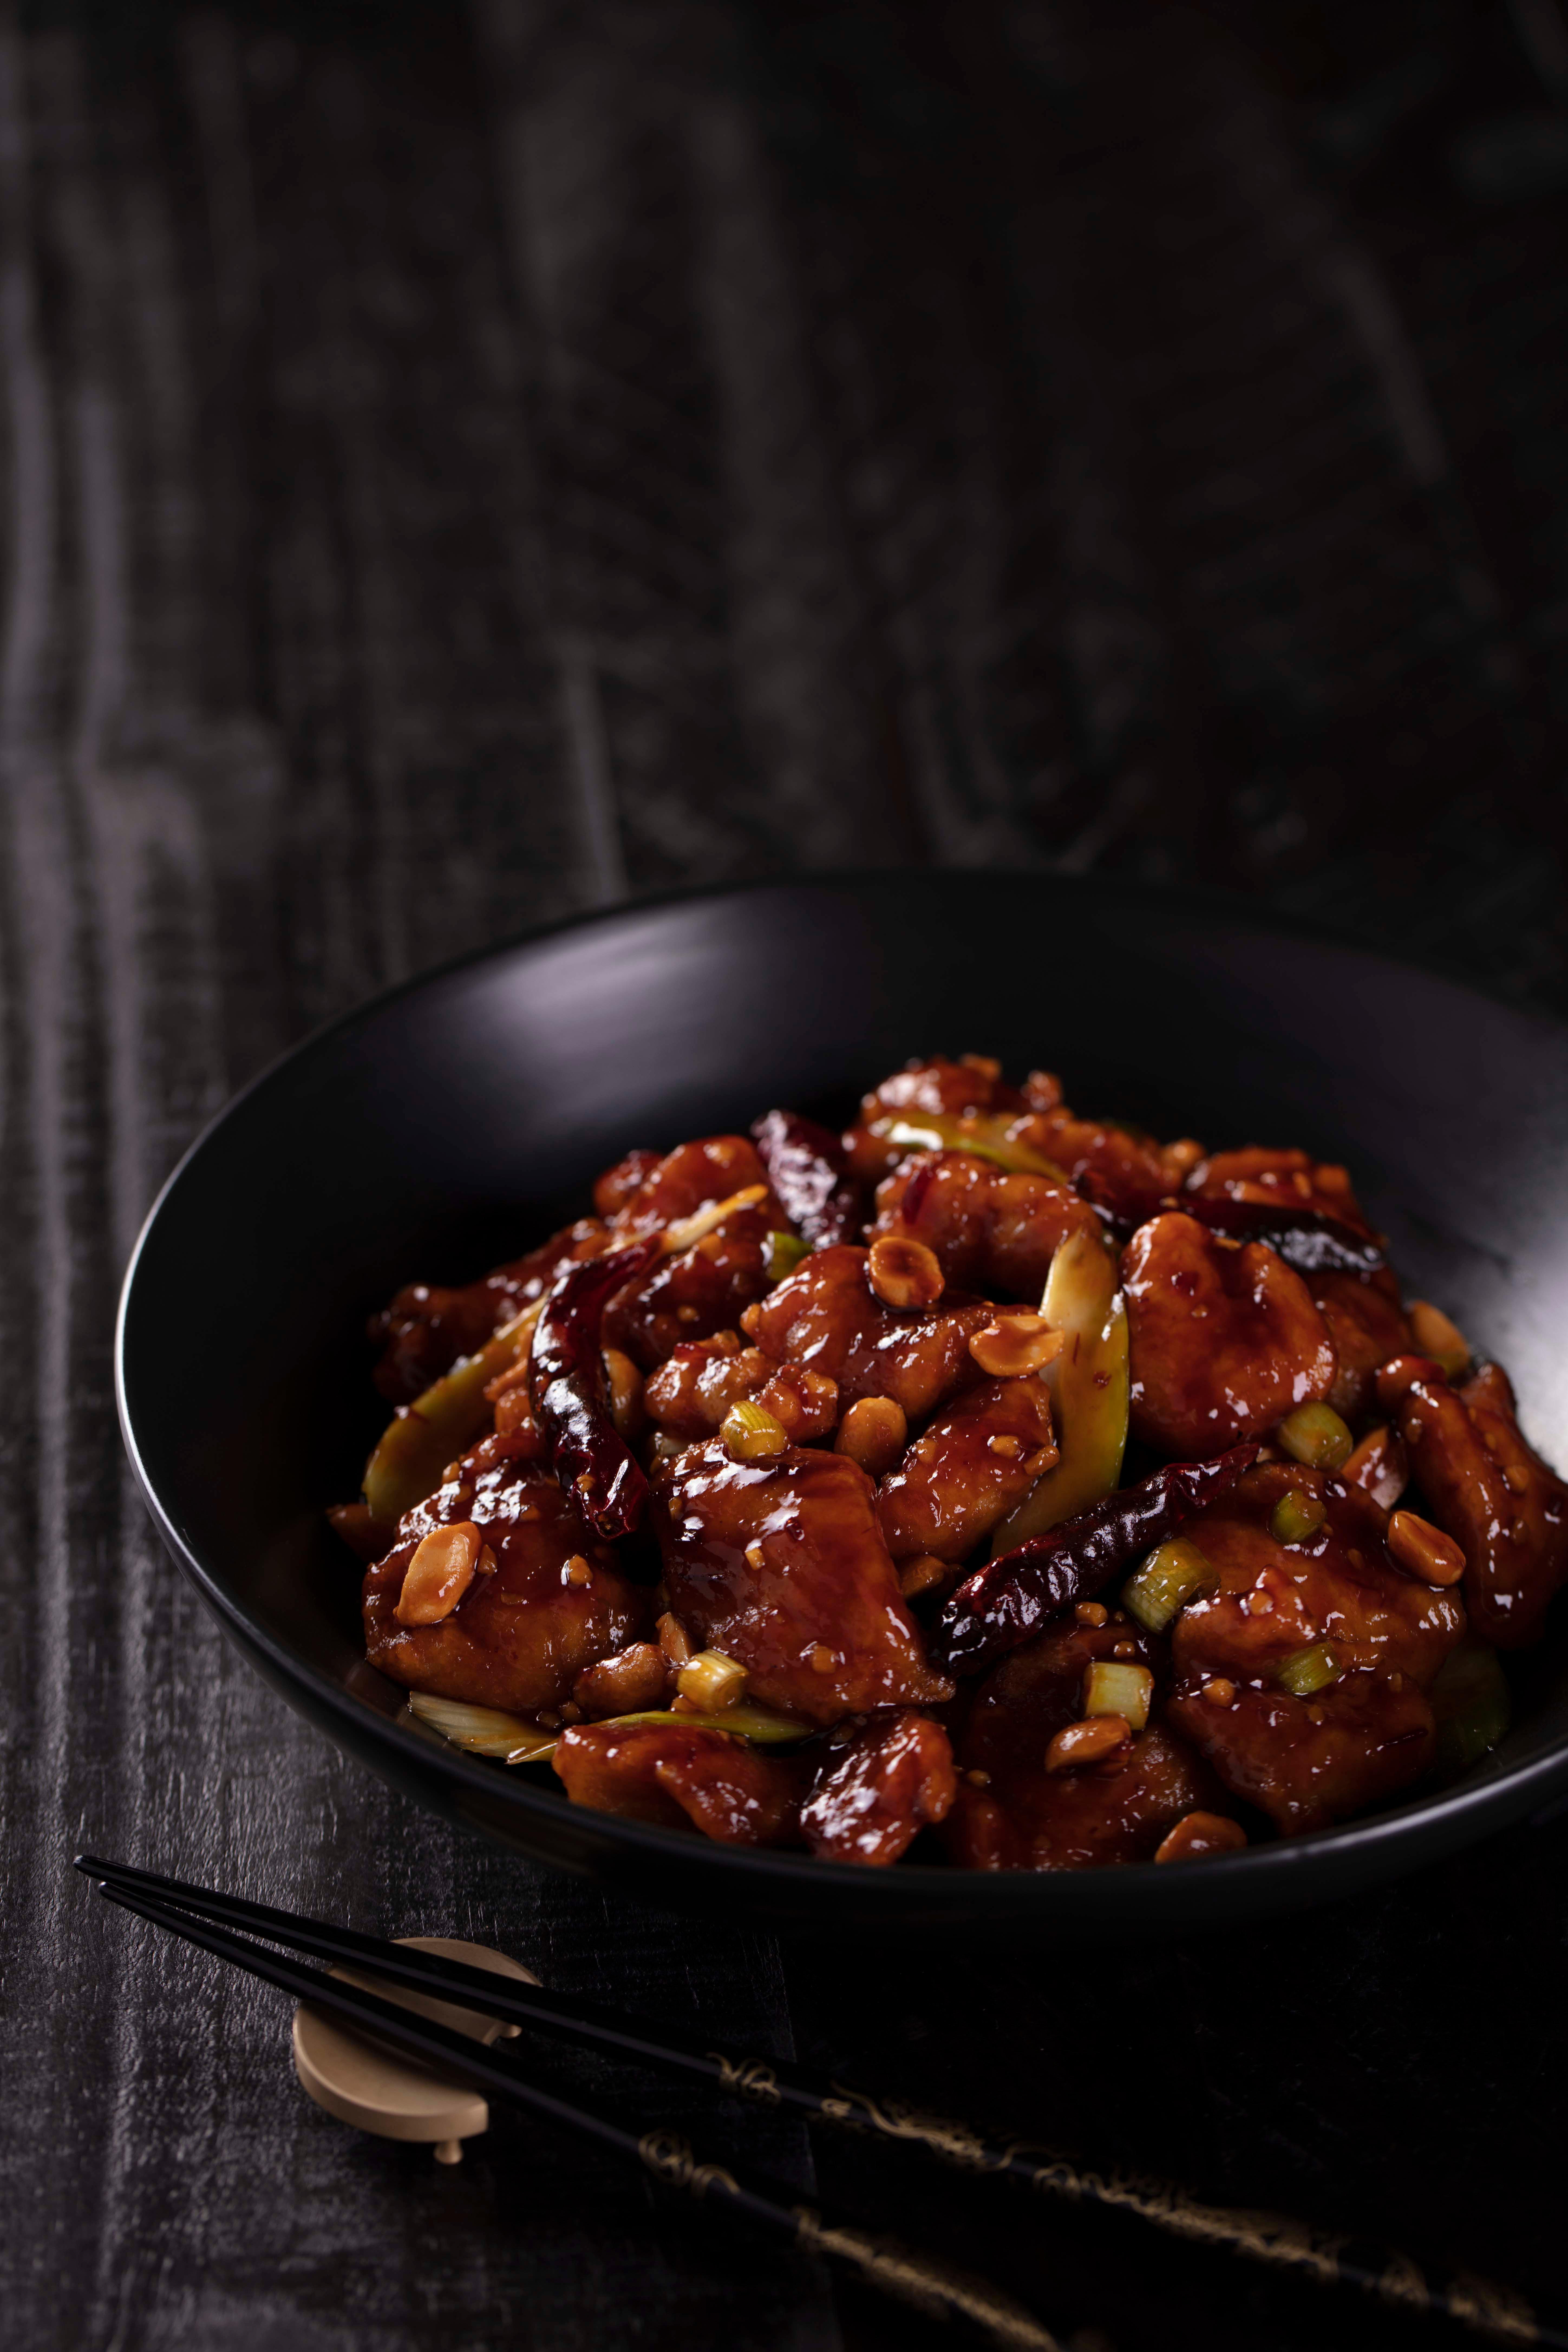 P.F. Chang's Kung Pao Chicken